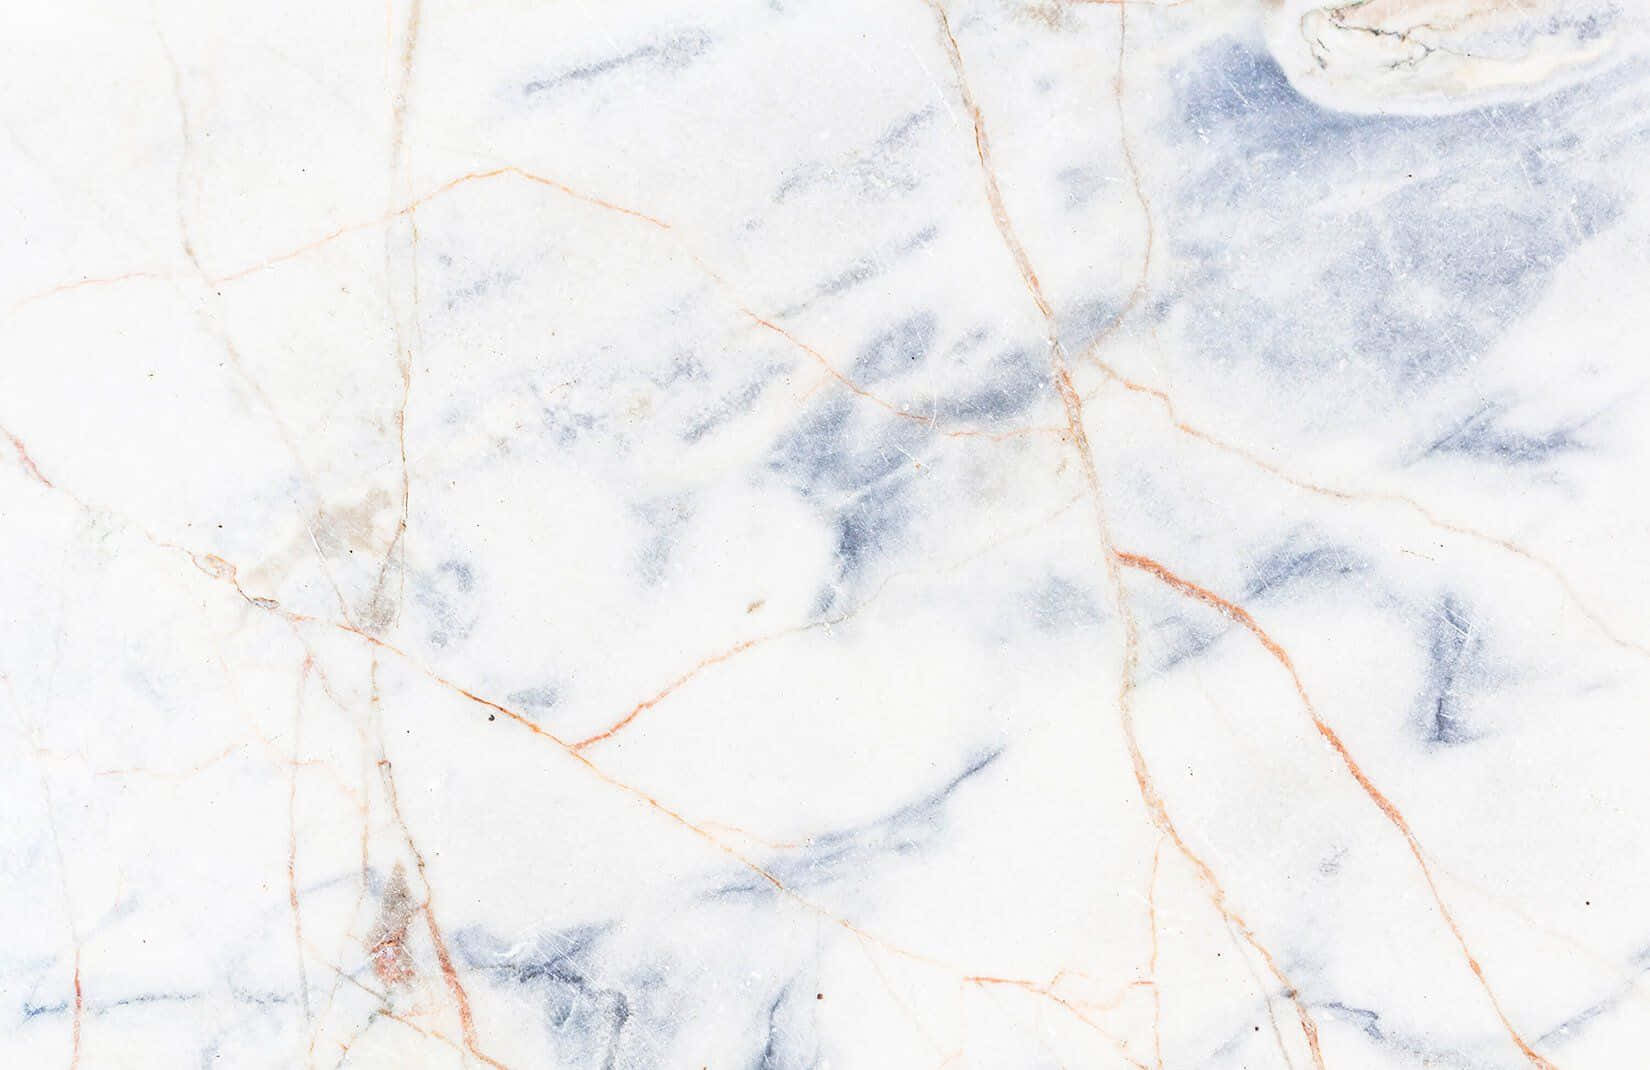 Beautify your workspace with the intricate pattern of Aesthetic Marble Desktop wallpaper Wallpaper